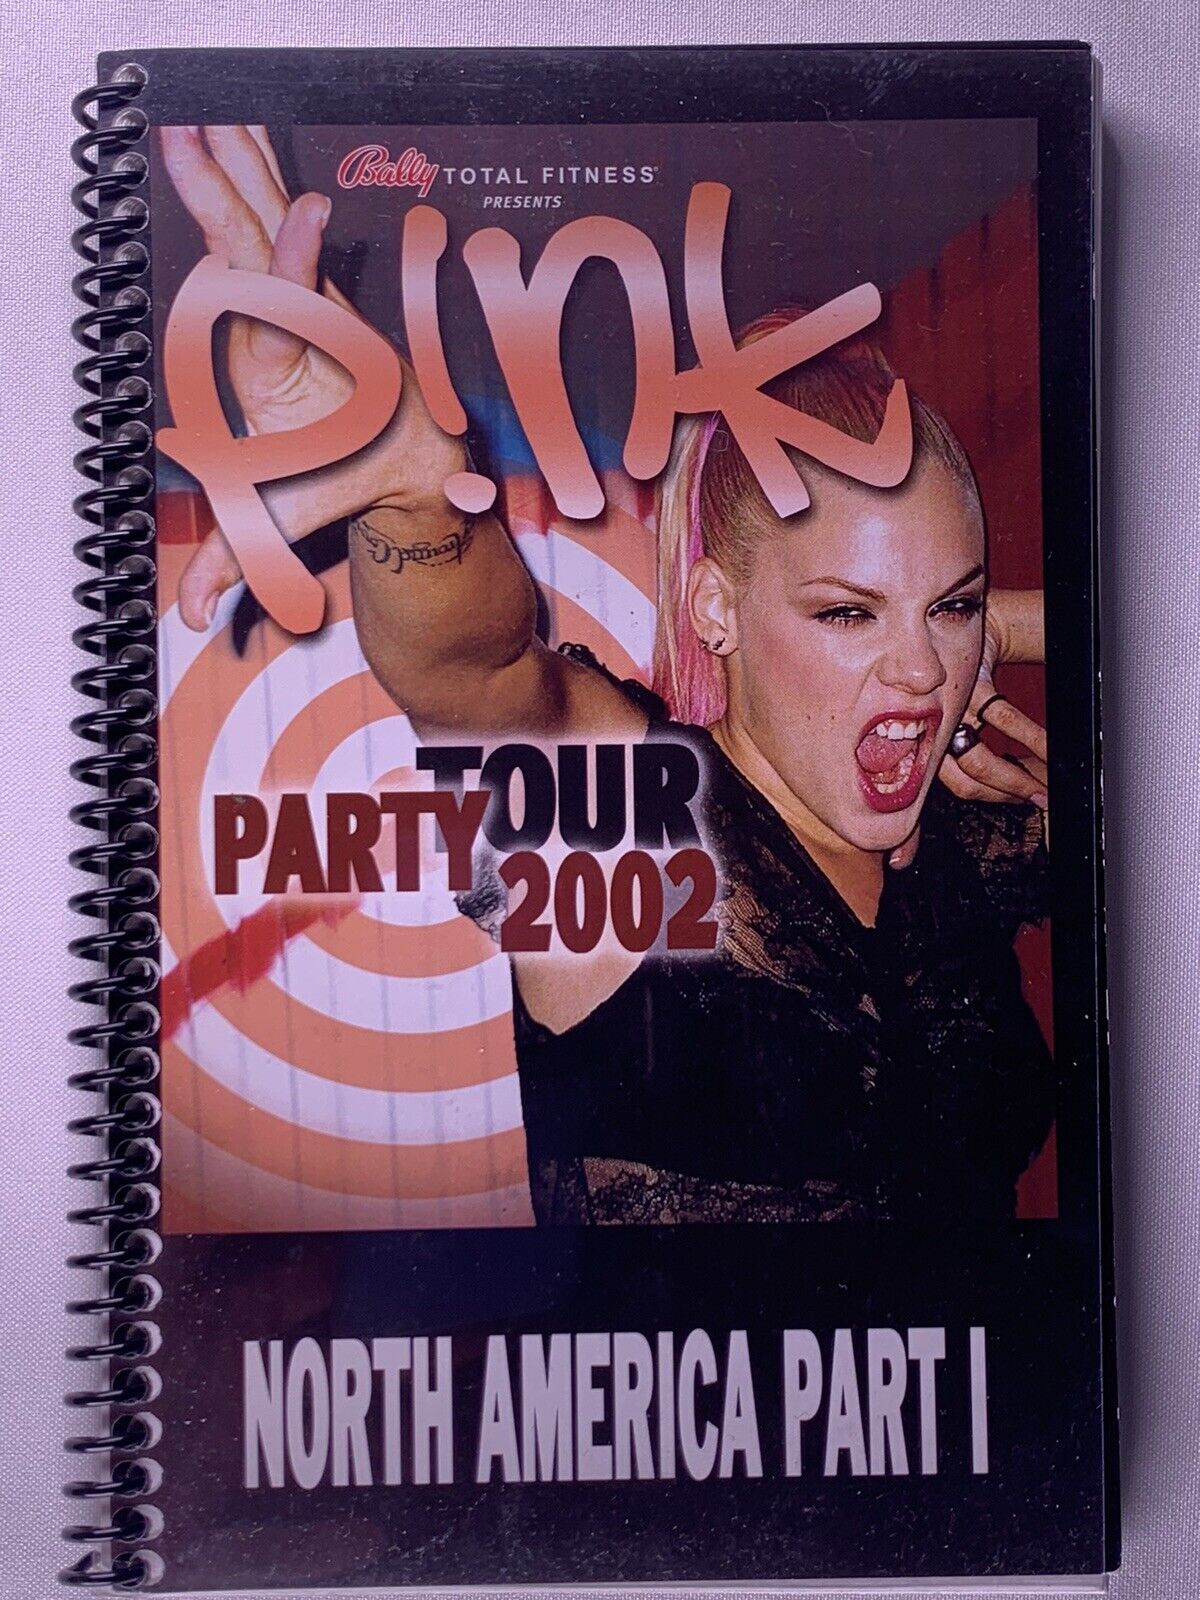 Pink Itinerary Original Vintage North American Party Tour Part I May - June 2002